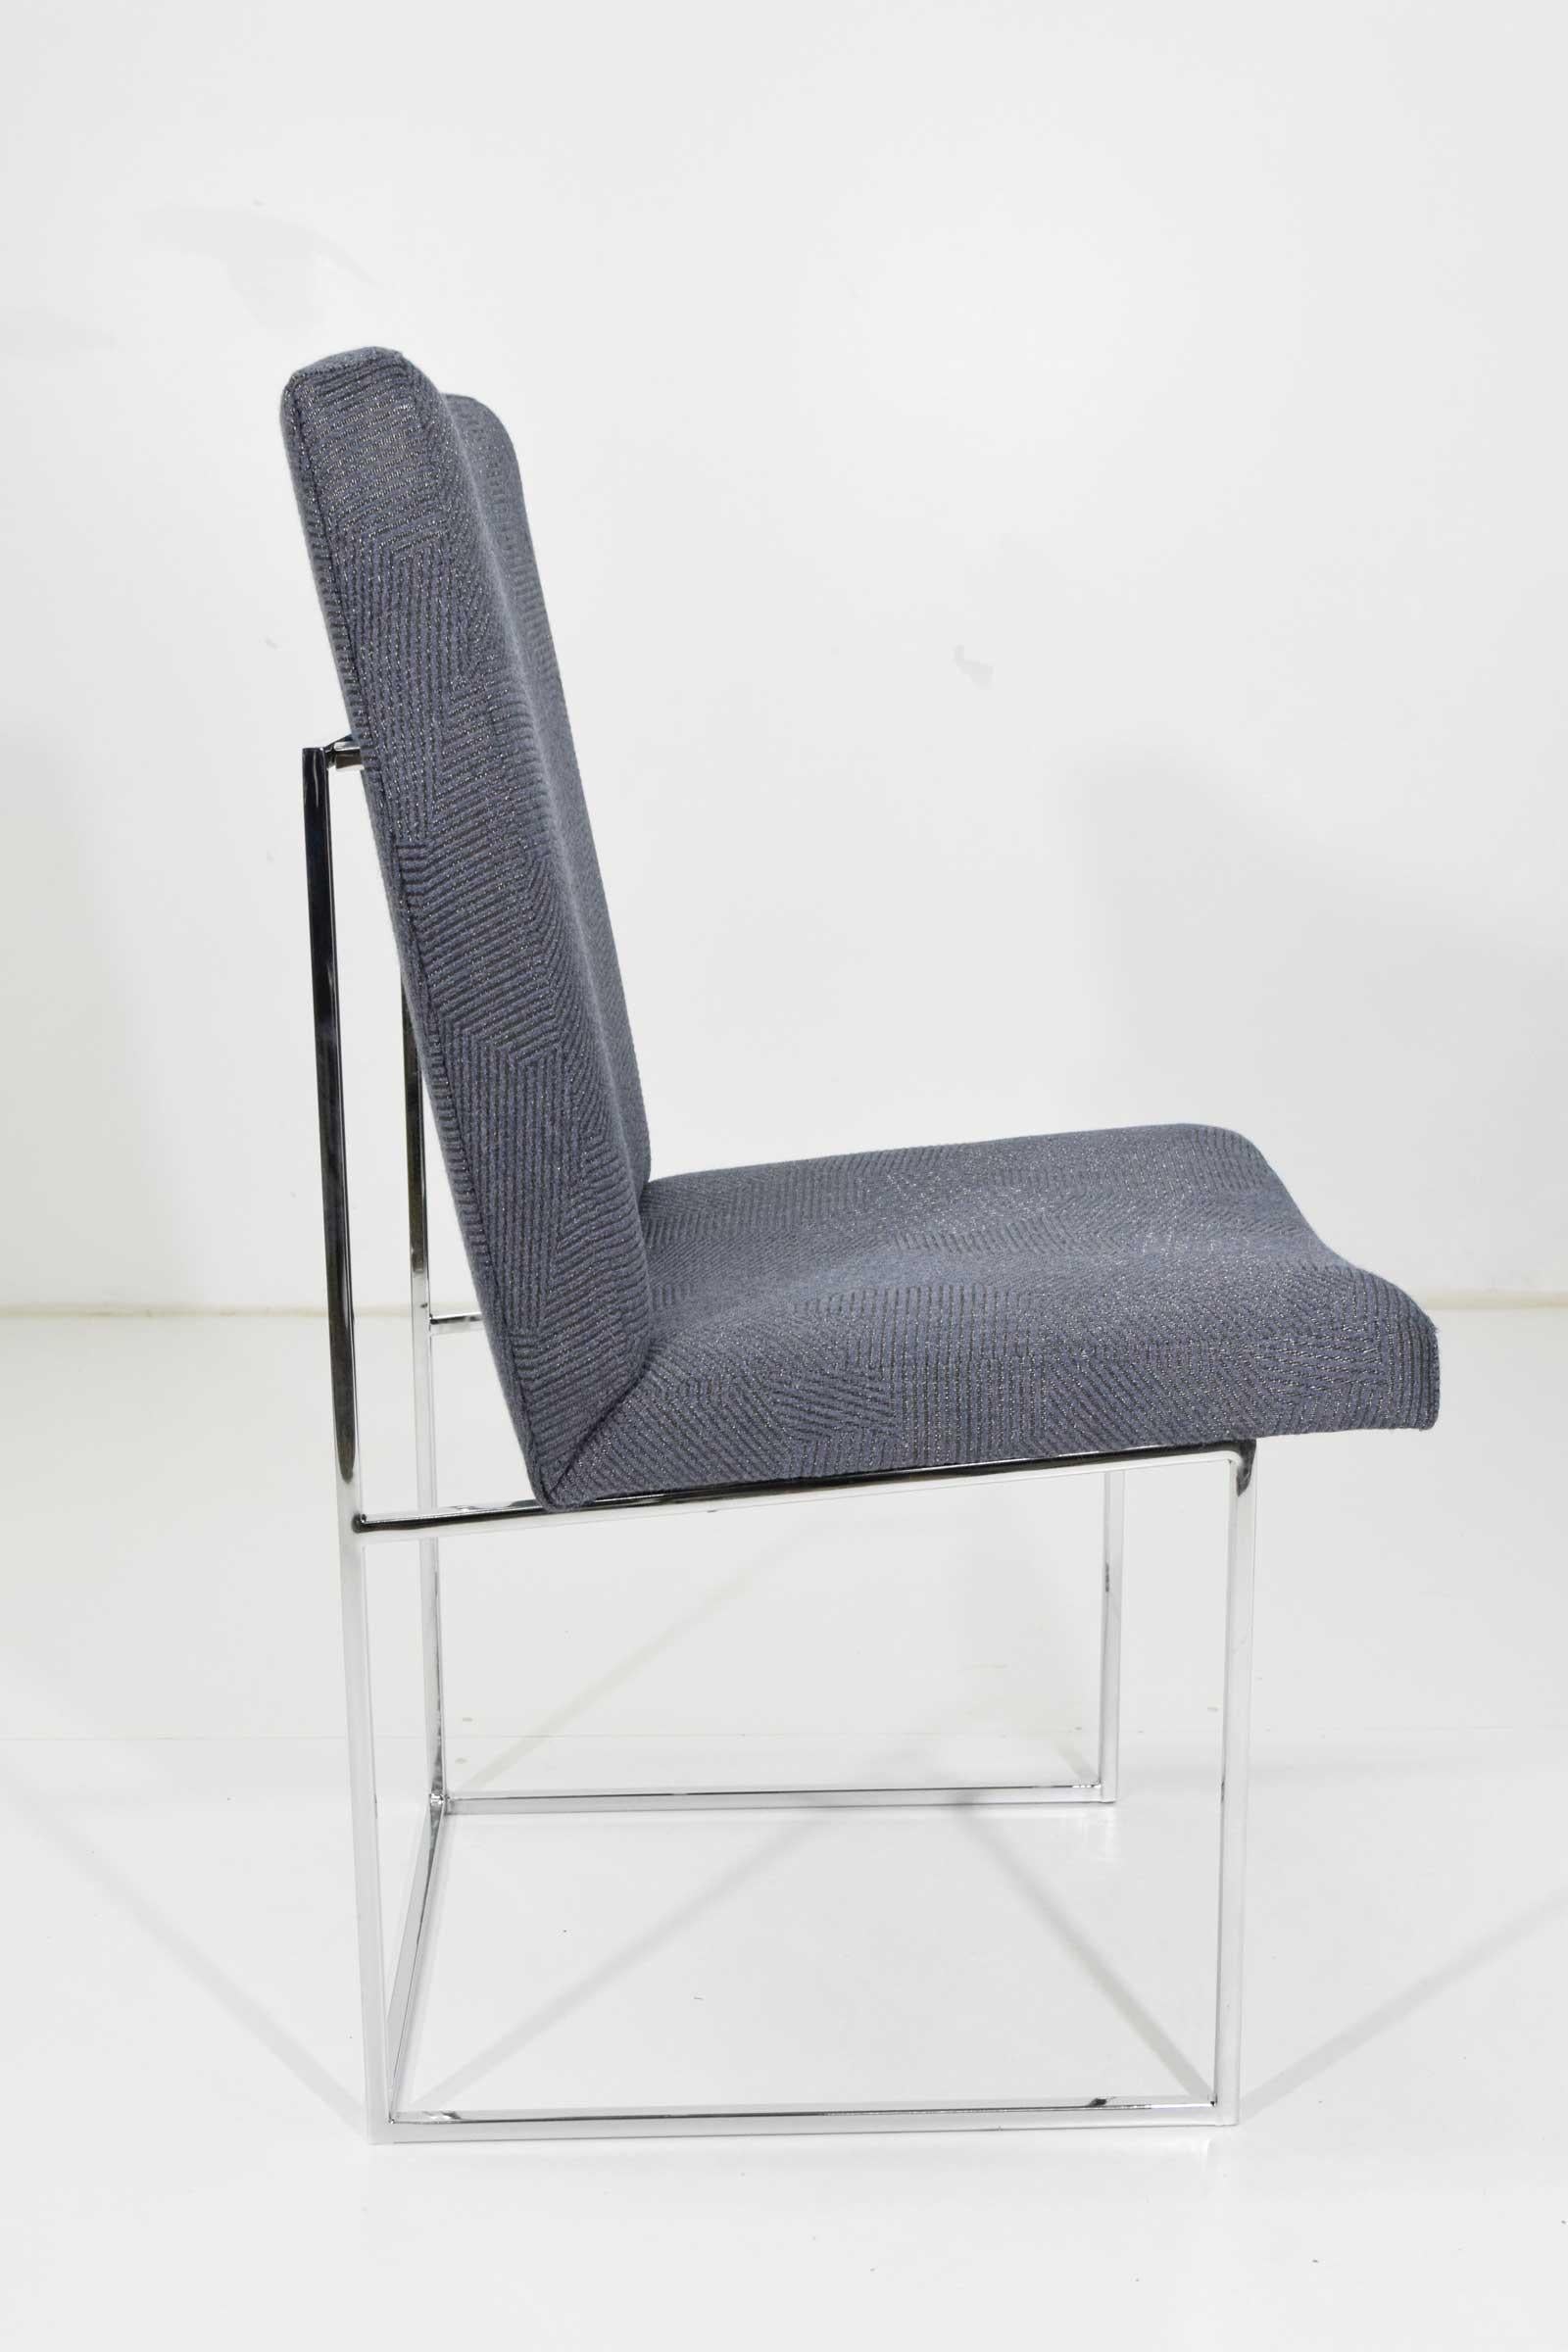 Milo Baughman Chrome Dining Chair in Holly Hunt Blue Alpaca, by Pairs up to 8 In Excellent Condition For Sale In Dallas, TX